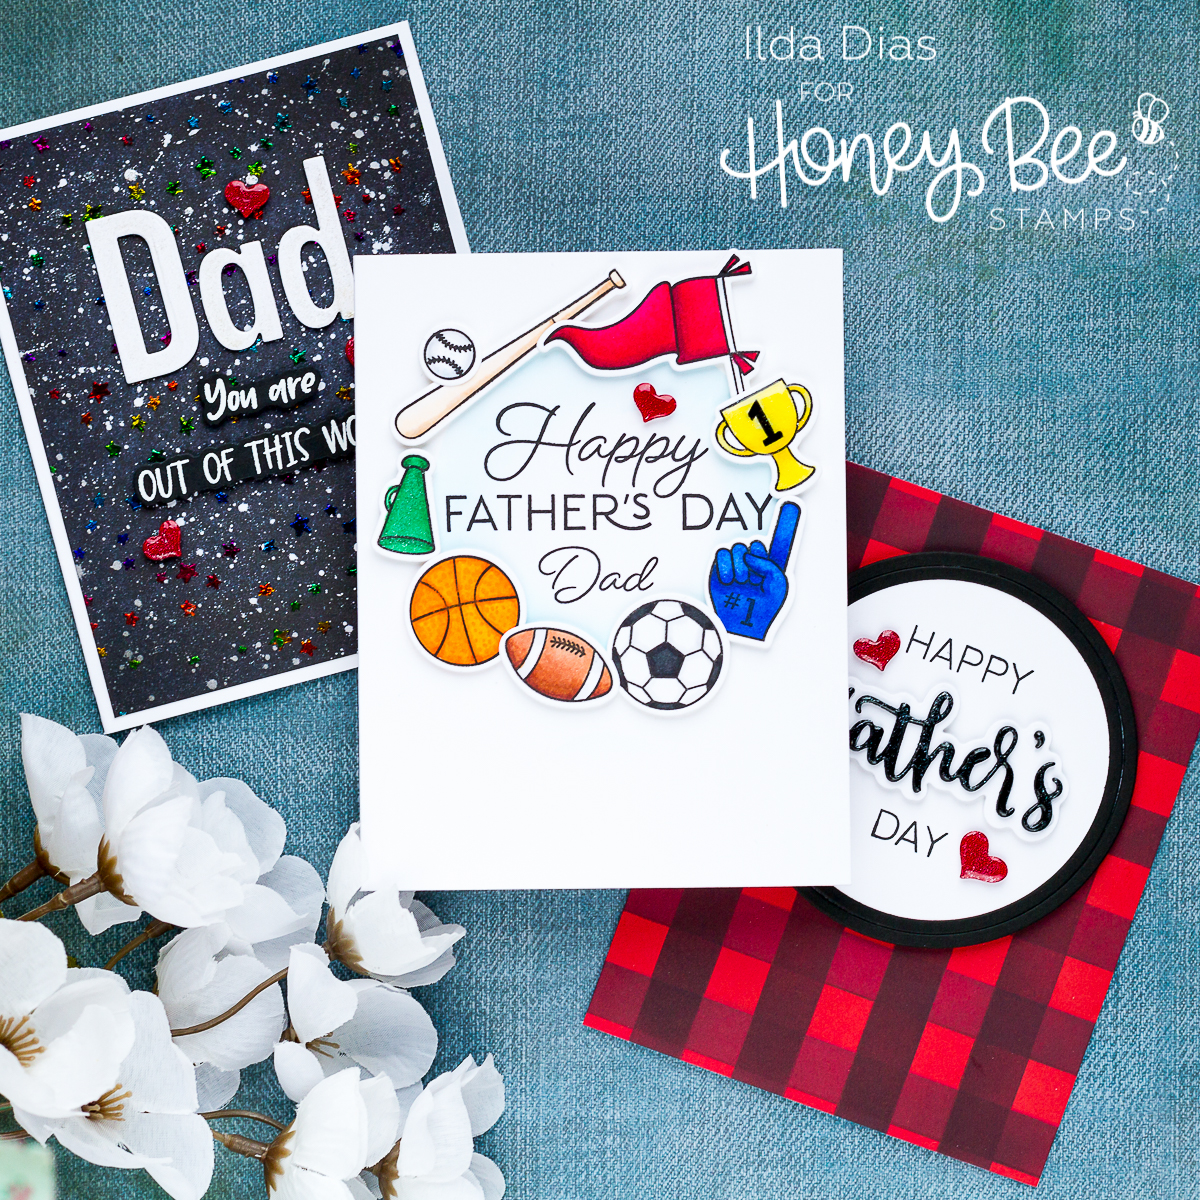 Simple, Father's Day Cards, Stencils, Honey Bee Stamps, Ink Blending, stamps, dies, card making, stamping, ilovedoingallthingscrafty, handmade card, how to,